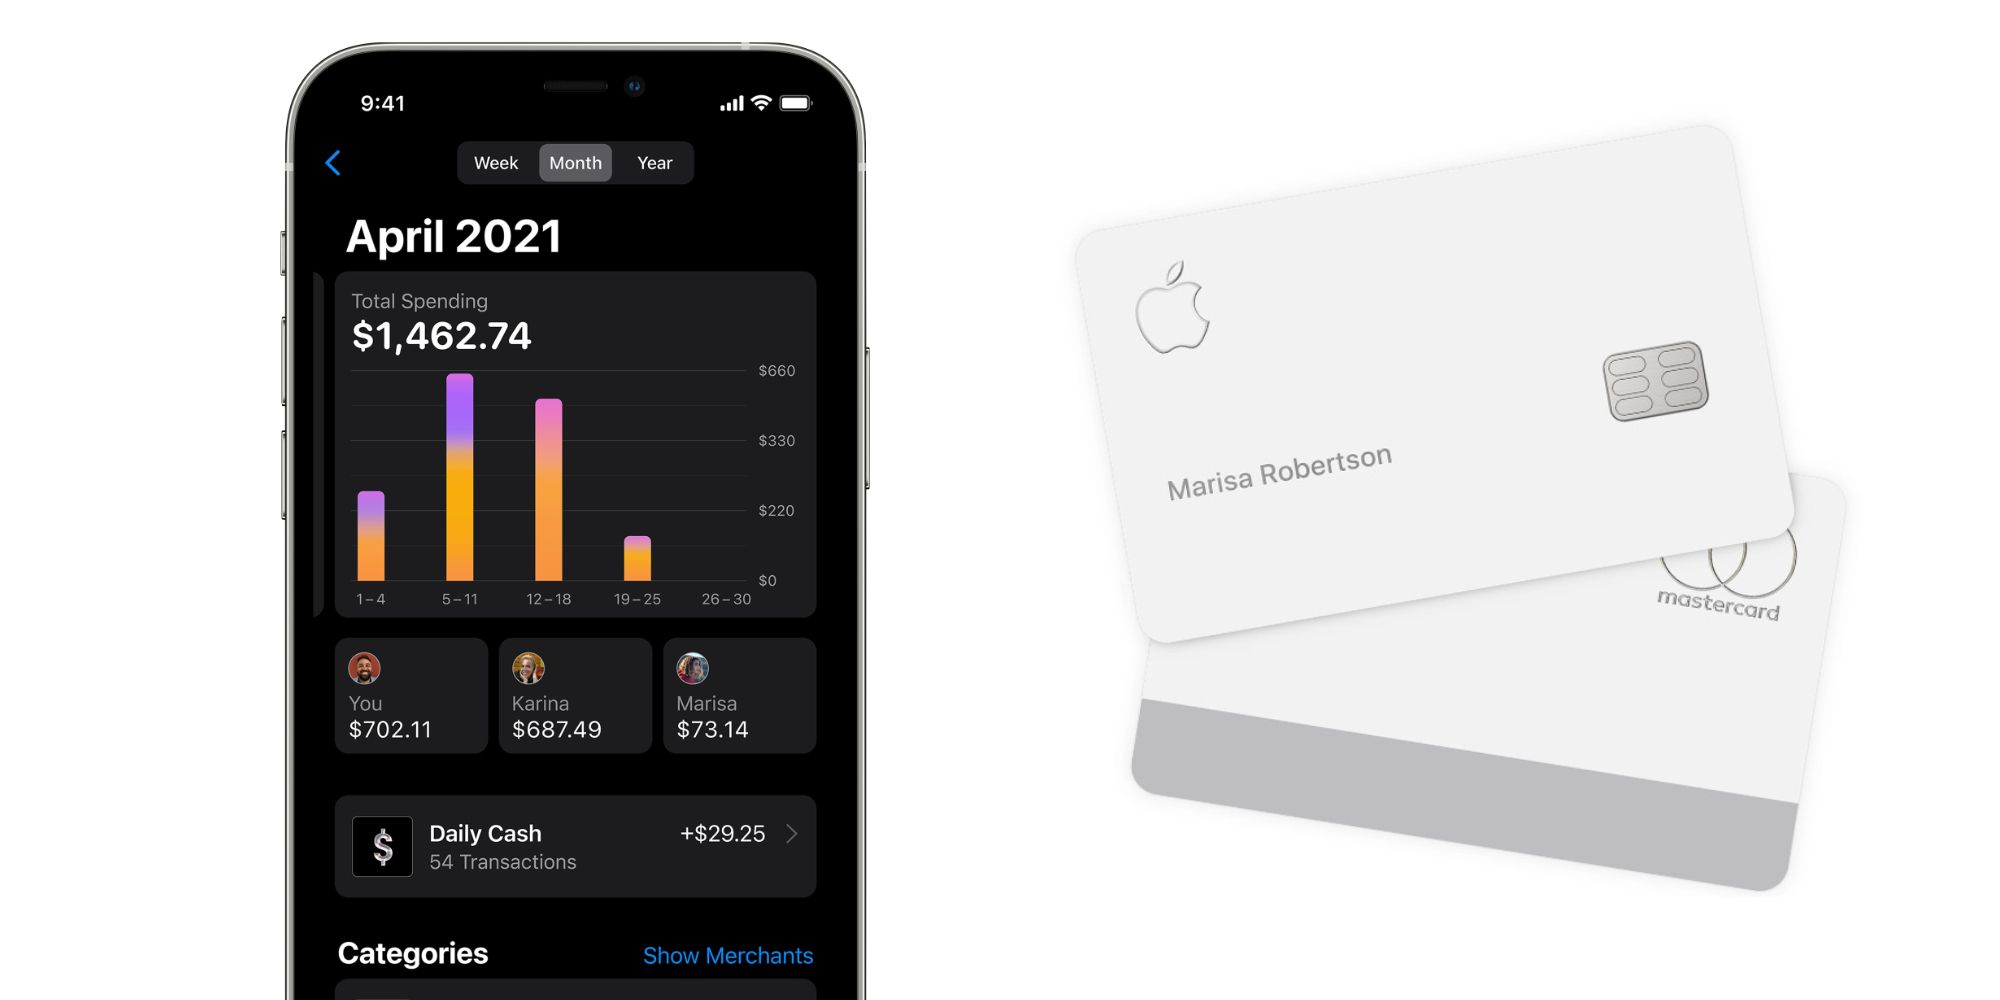 Apple Card Family features on an iPhone